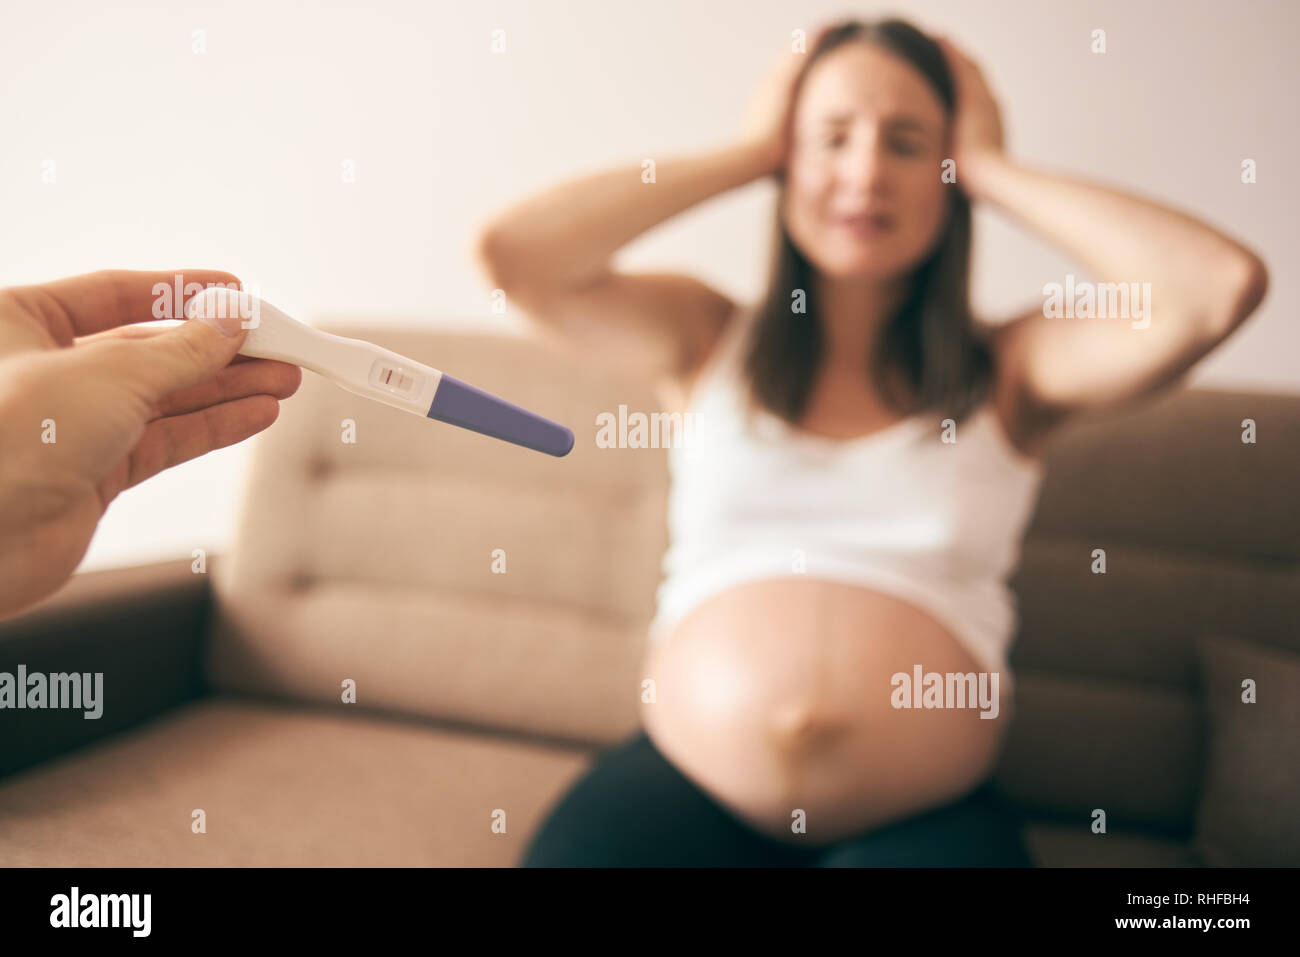 Selective focus of pregnancy test on male hand. Sad pregnant woman in white shirt and in despair and crying sitting on sofa at background. Concept of disappointment and unwanted child. Stock Photo